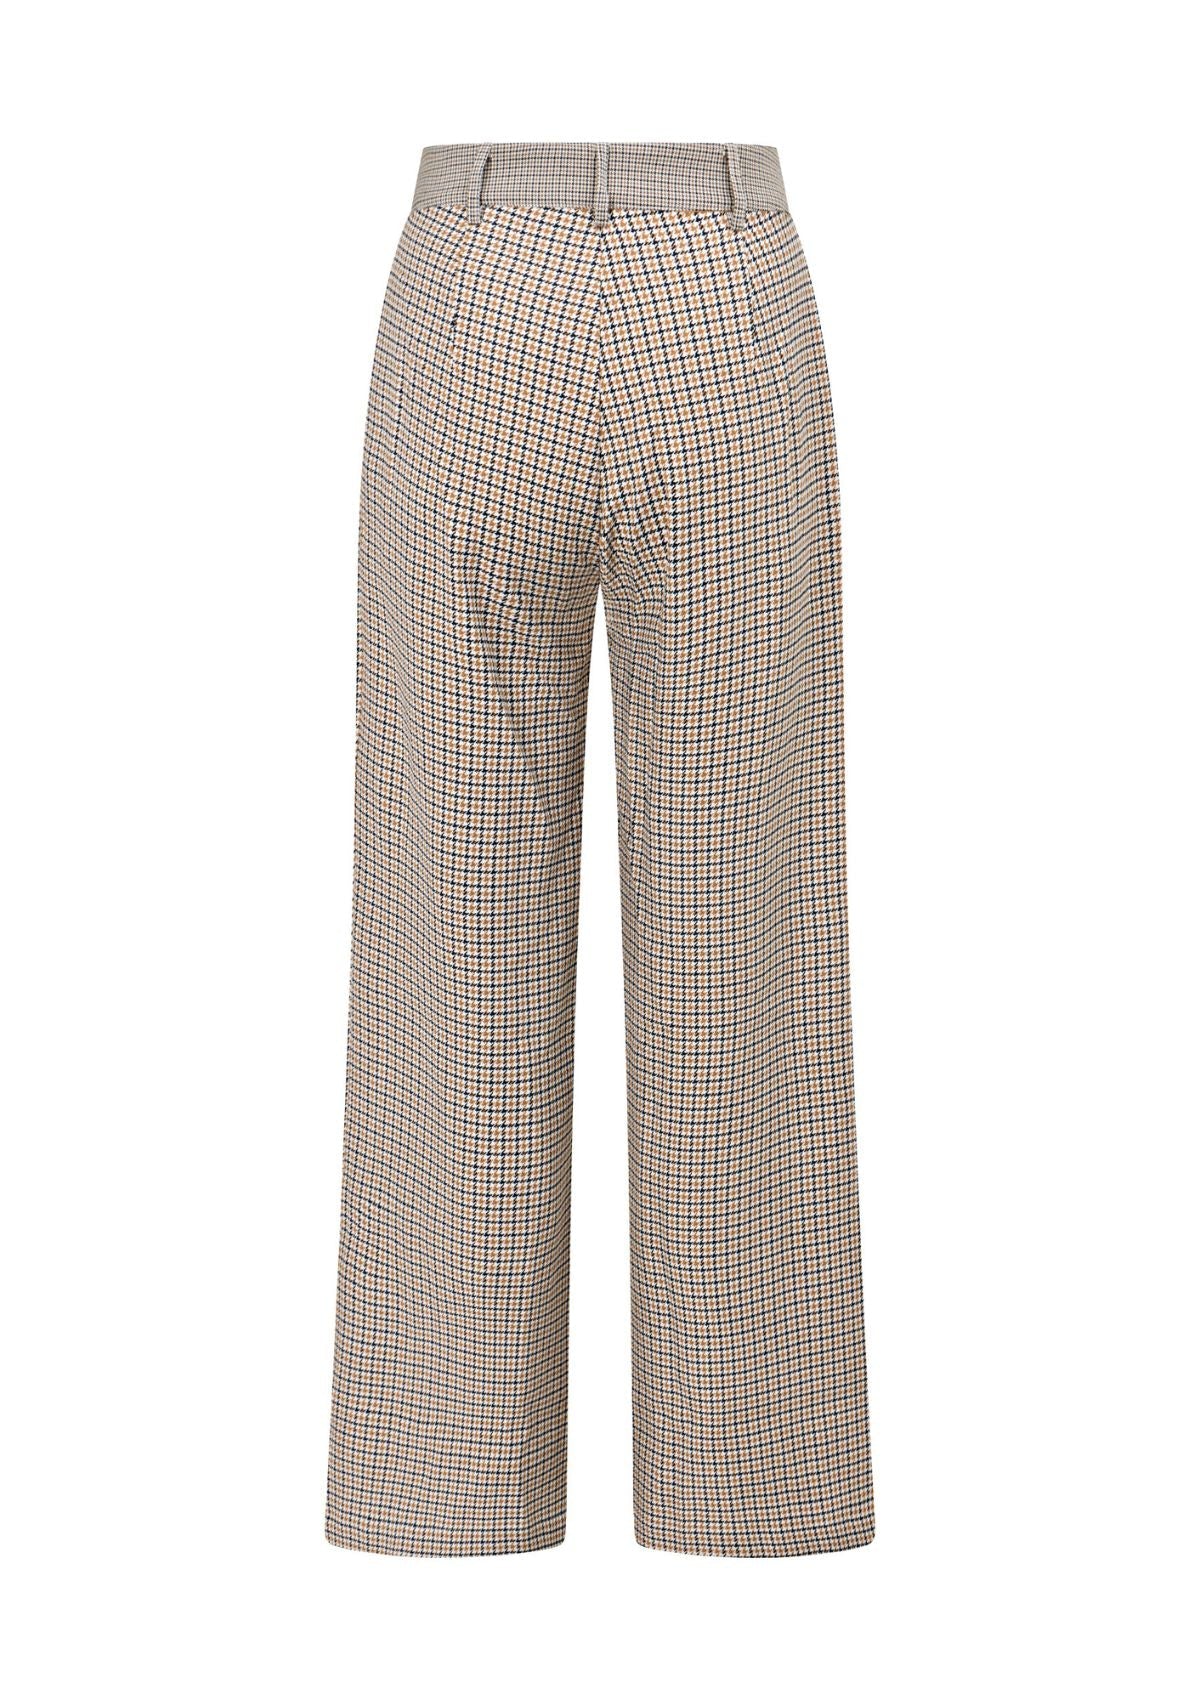 The Dylan Houndstooth Trouser